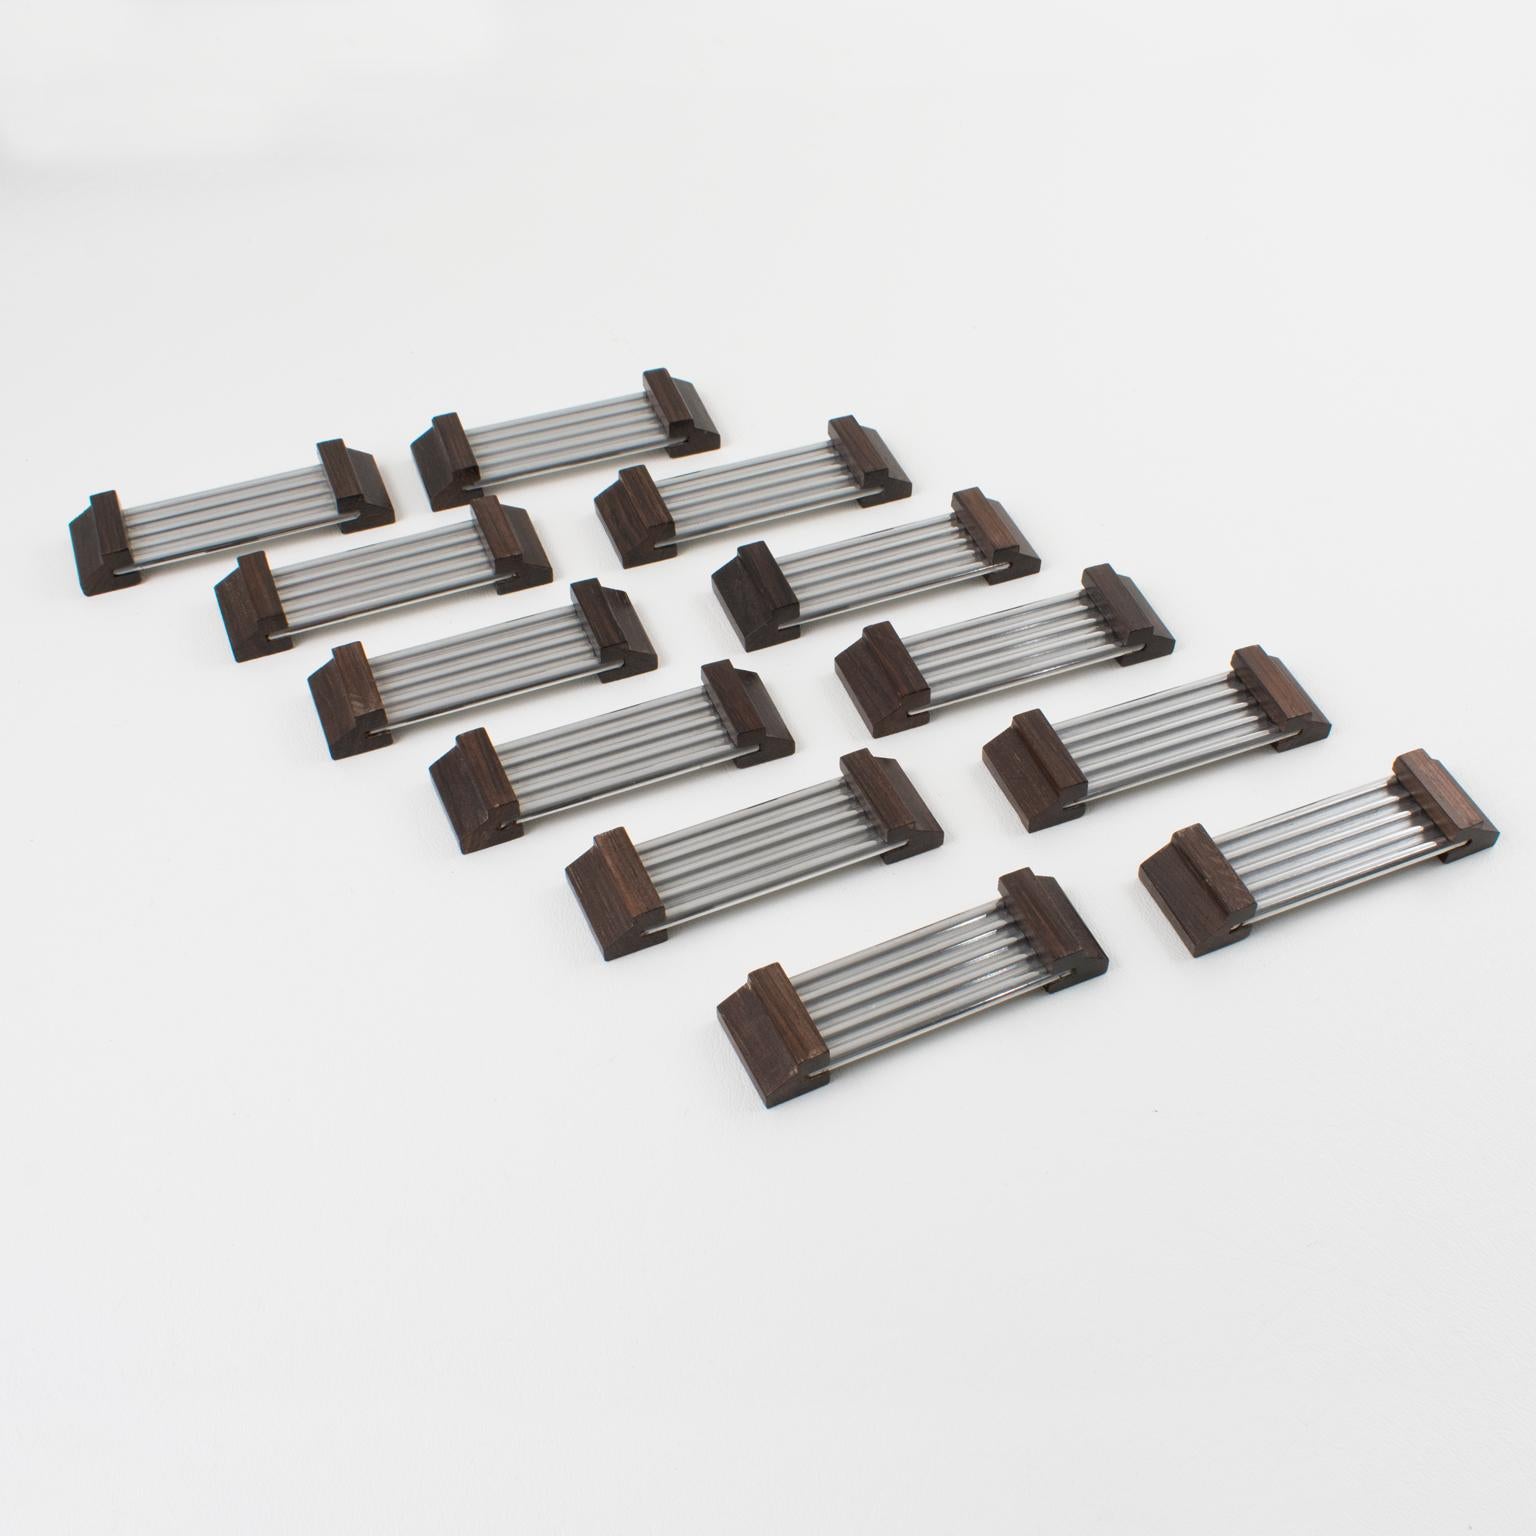 This elegant French Art Deco set of twelve chopsticks or knife rests is made of aluminum and Macassar wood. The modernist shape displays a waved metal flat stick bar and geometric carved wood sides. There is no visible maker's mark, and the set is